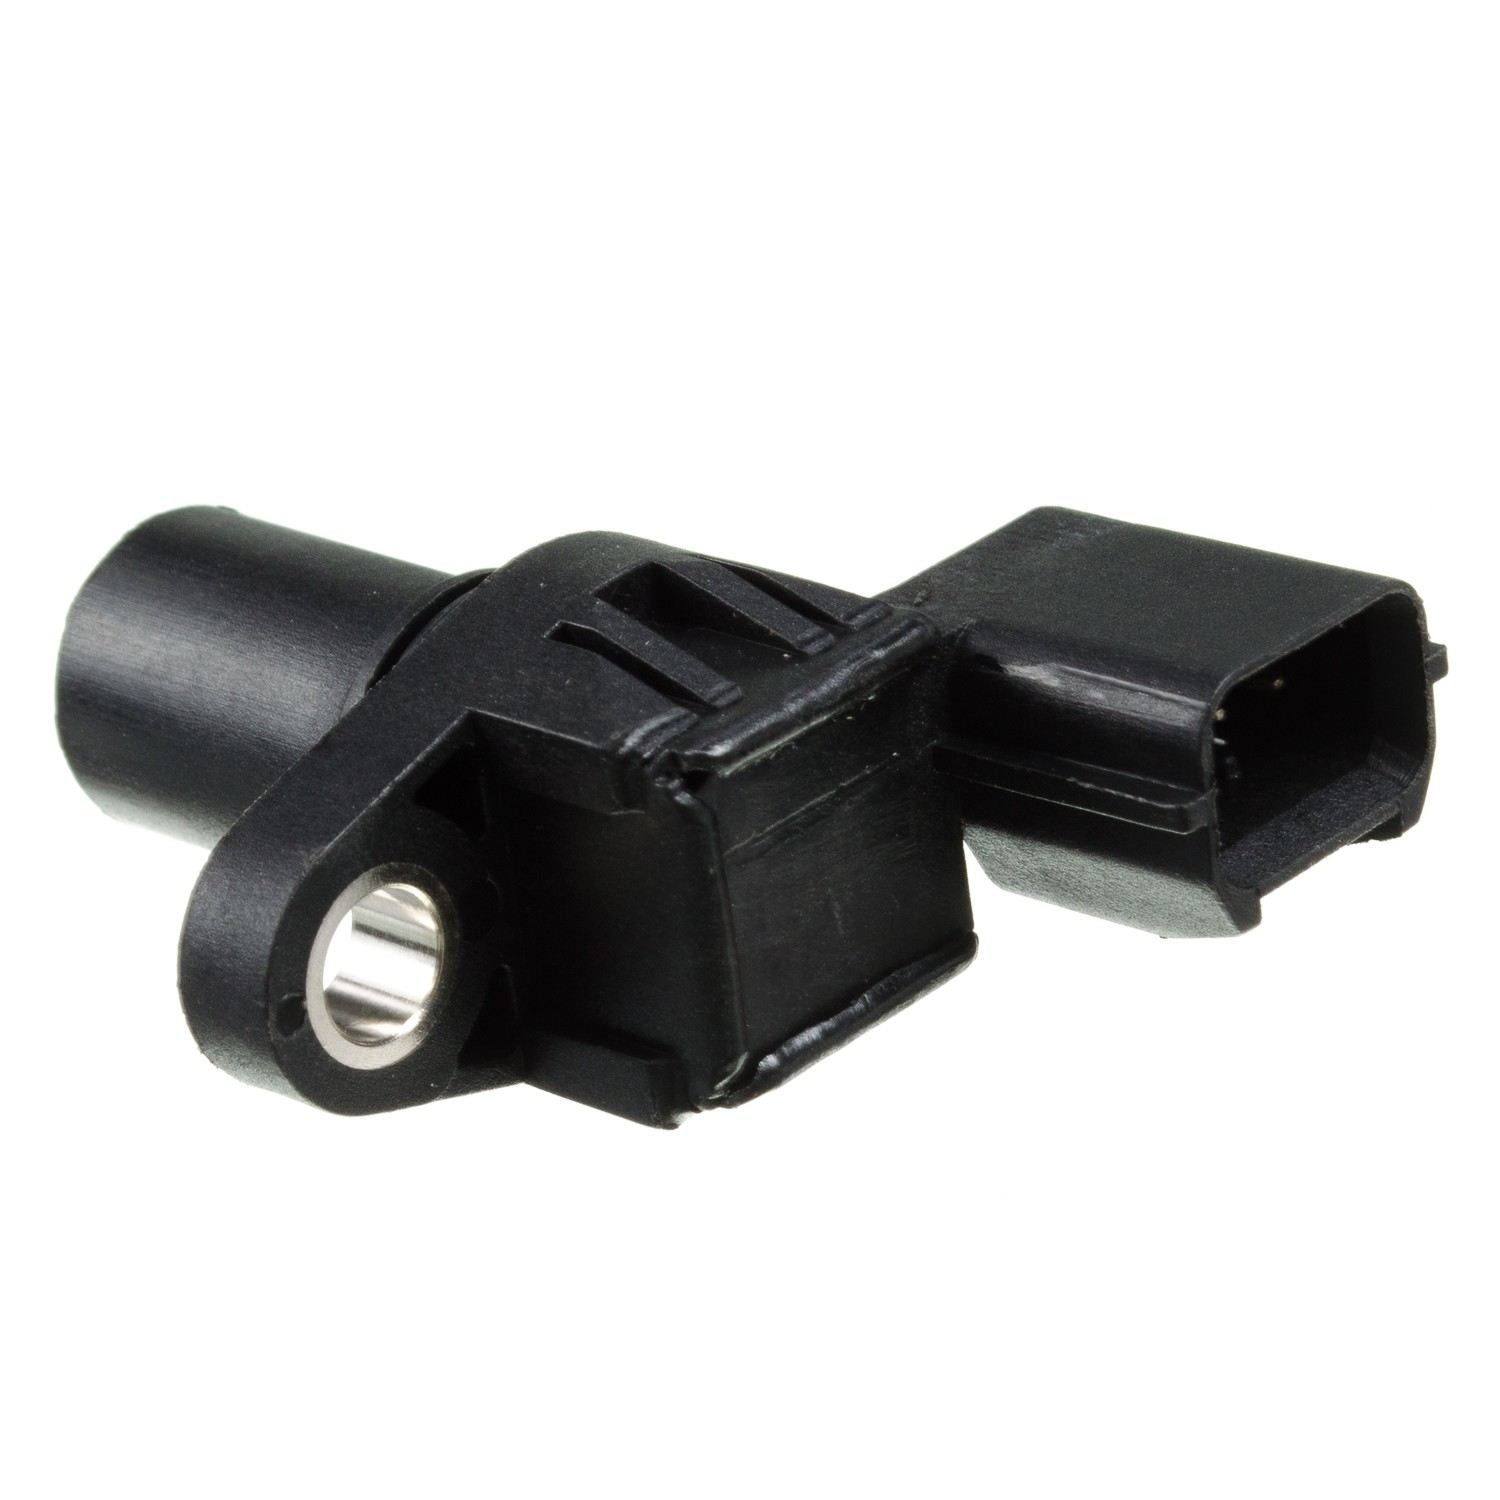 Front View of Vehicle Speed Sensor HOLSTEIN 2ABS1901